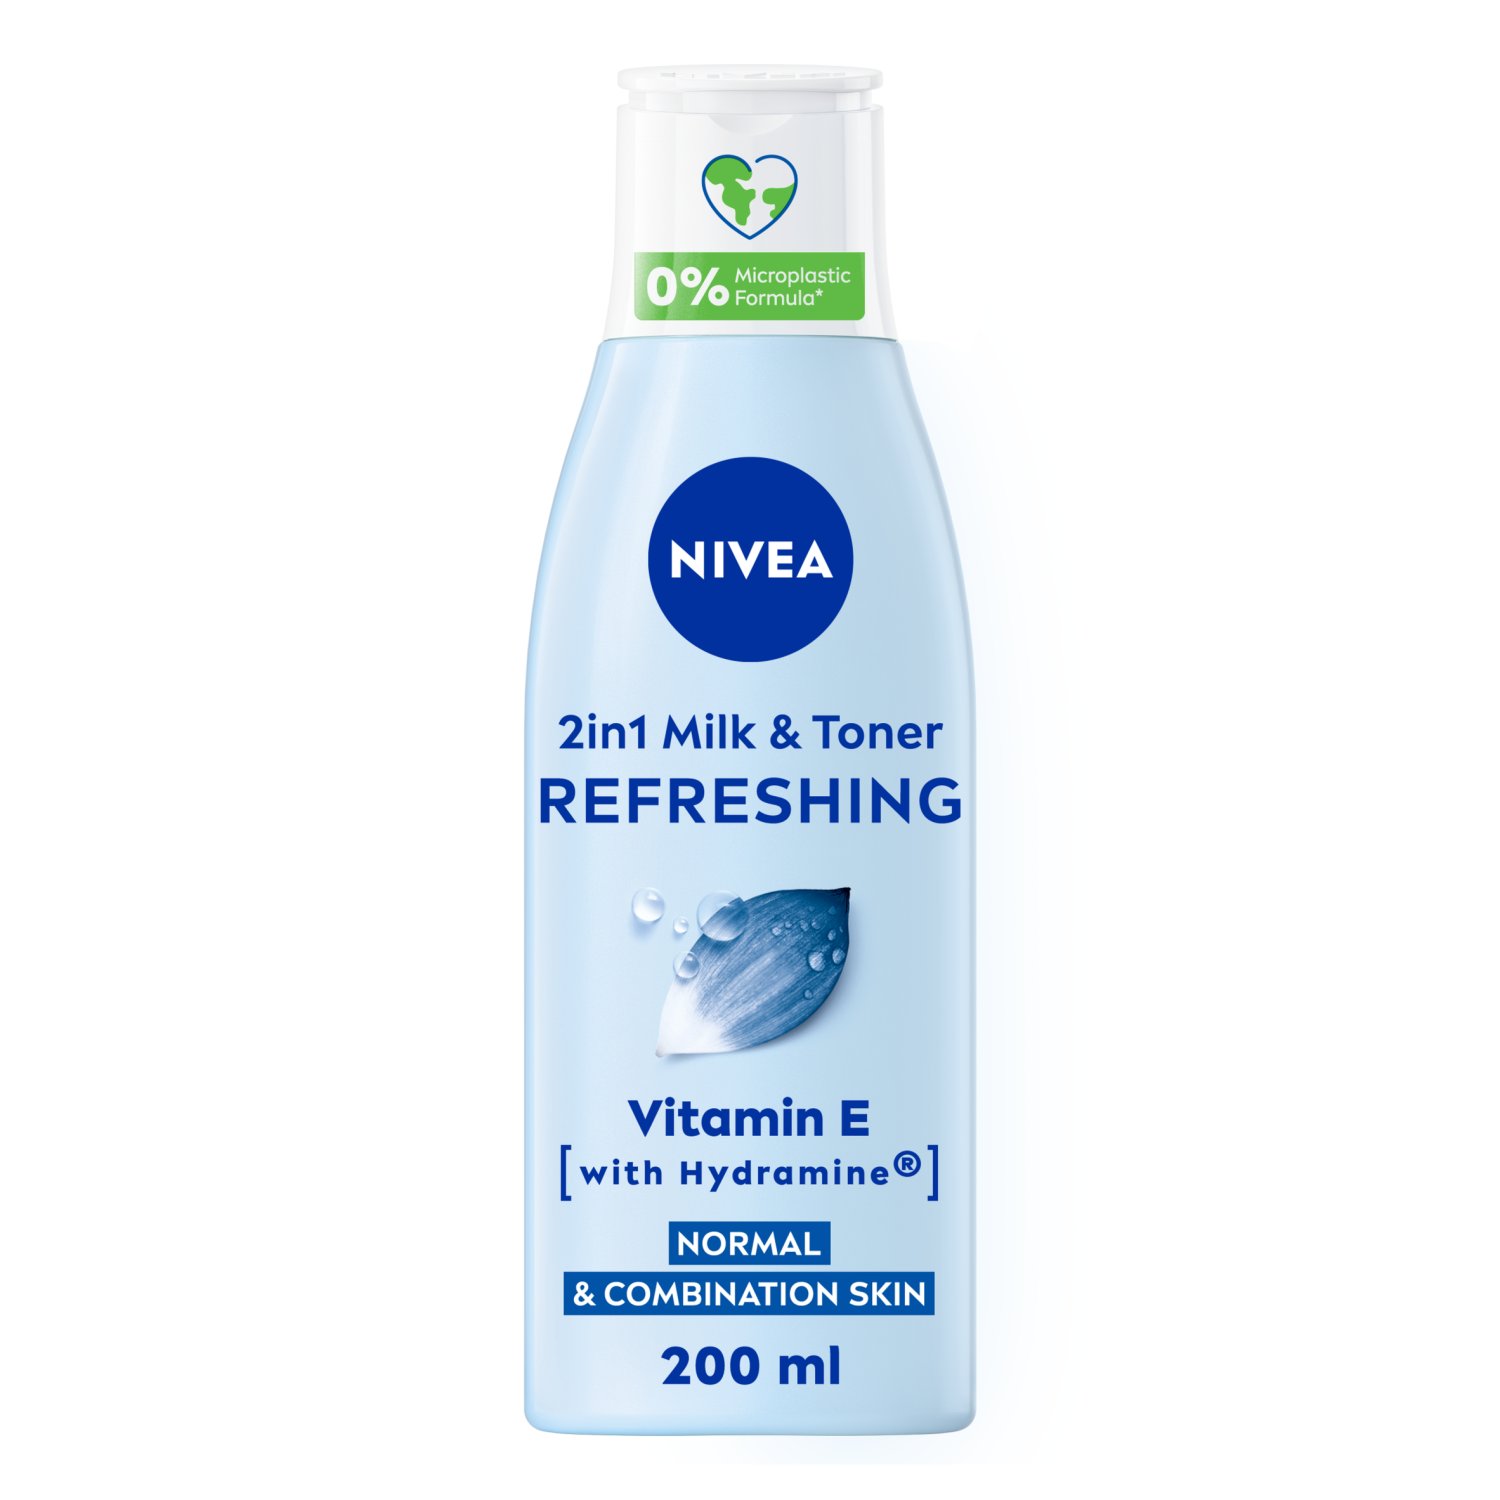 The NIVEA Refreshing 2-in-1 Milk & Toner is enriched with Vitamin E and Hydramine, which is known to effectively bind moisture in the skin. Especially developed for normal and combination skin, it not only deeply cleanses, tones and removes make-up, but also intensively moisturises and refreshes the skin. 

RESULT:
The skin is deeply cleansed and refreshed, looking healthy and beautiful.
Skin compatibility dermatologically approved.